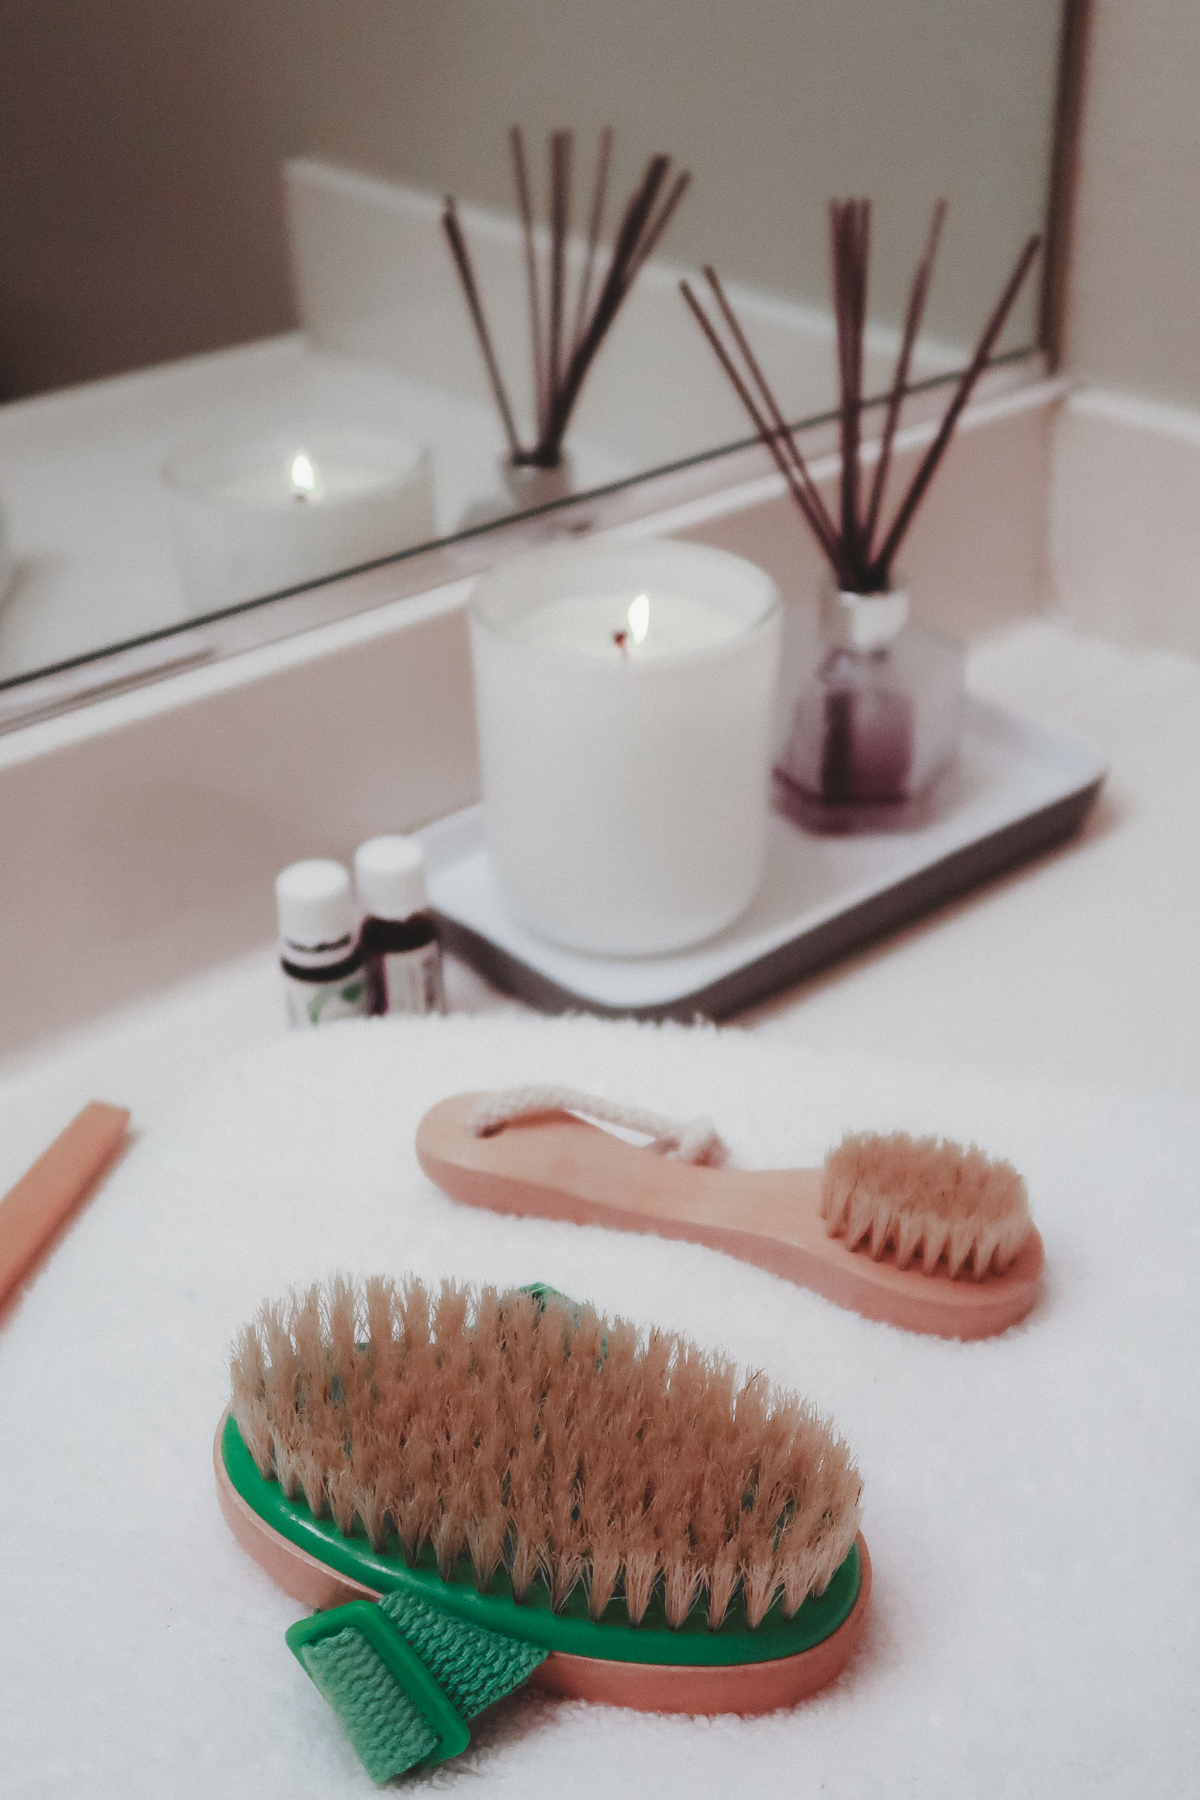 How To Clean A Dry Body Brush In 5 Quick Steps featured by top US beauty blog, Tea Cups & Tulips